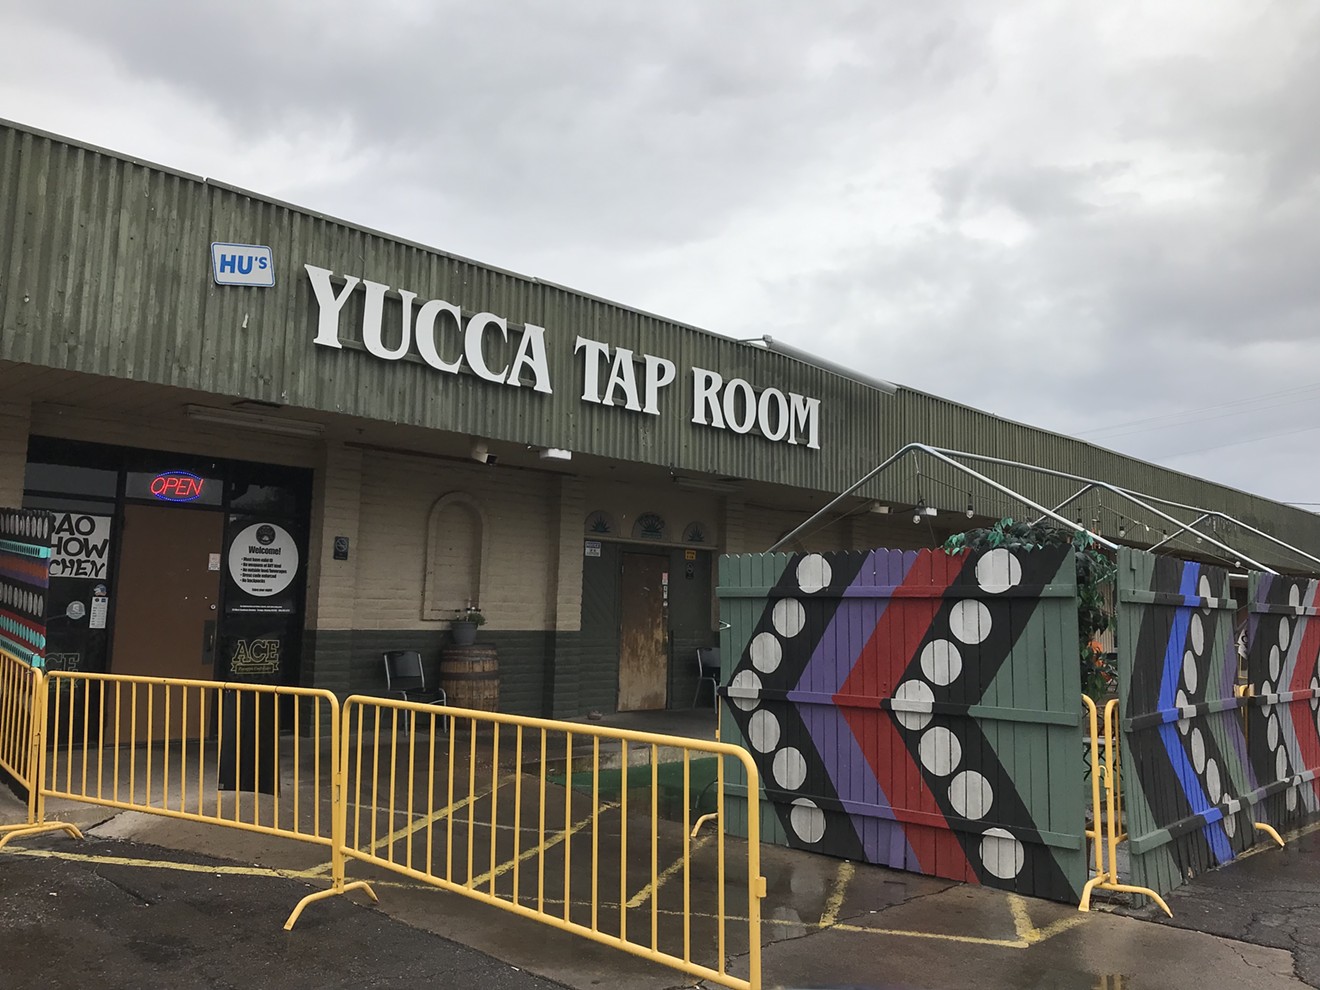 Entrance to Yucca Tap Room, with art by Kyllan Maney, at Danelle Plaza.